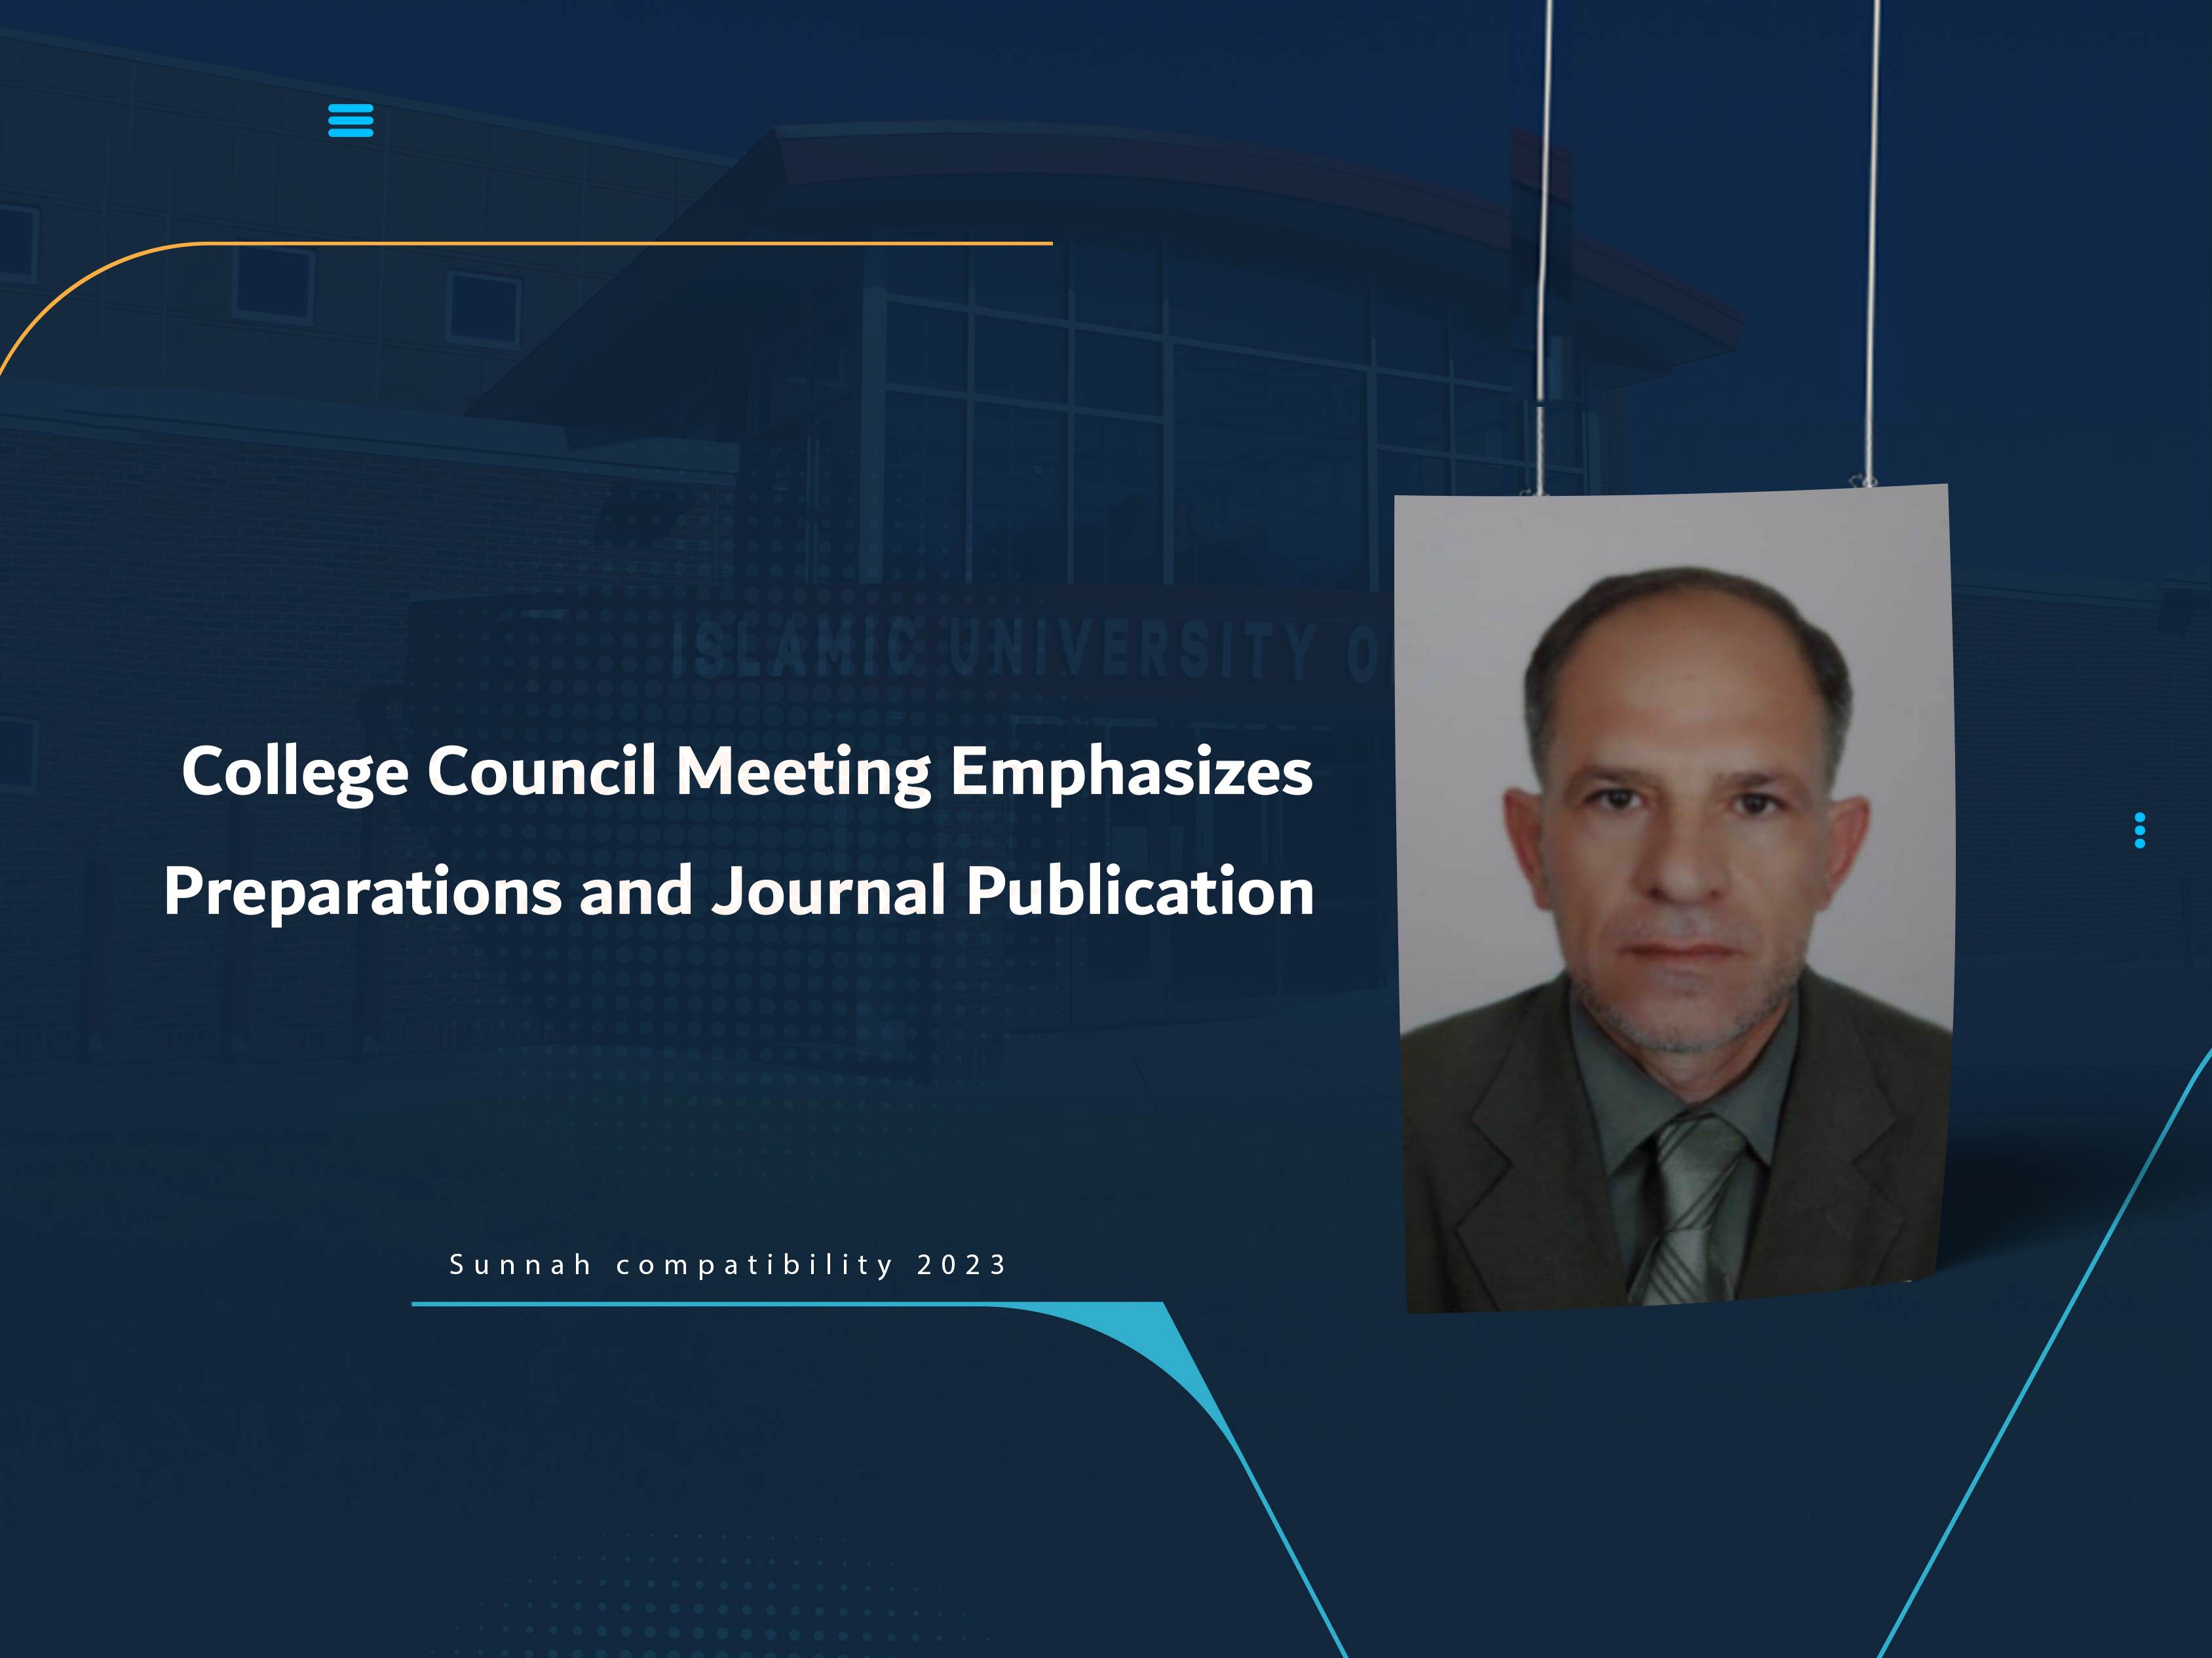 College Council Meeting Emphasizes Preparations and Journal Publication